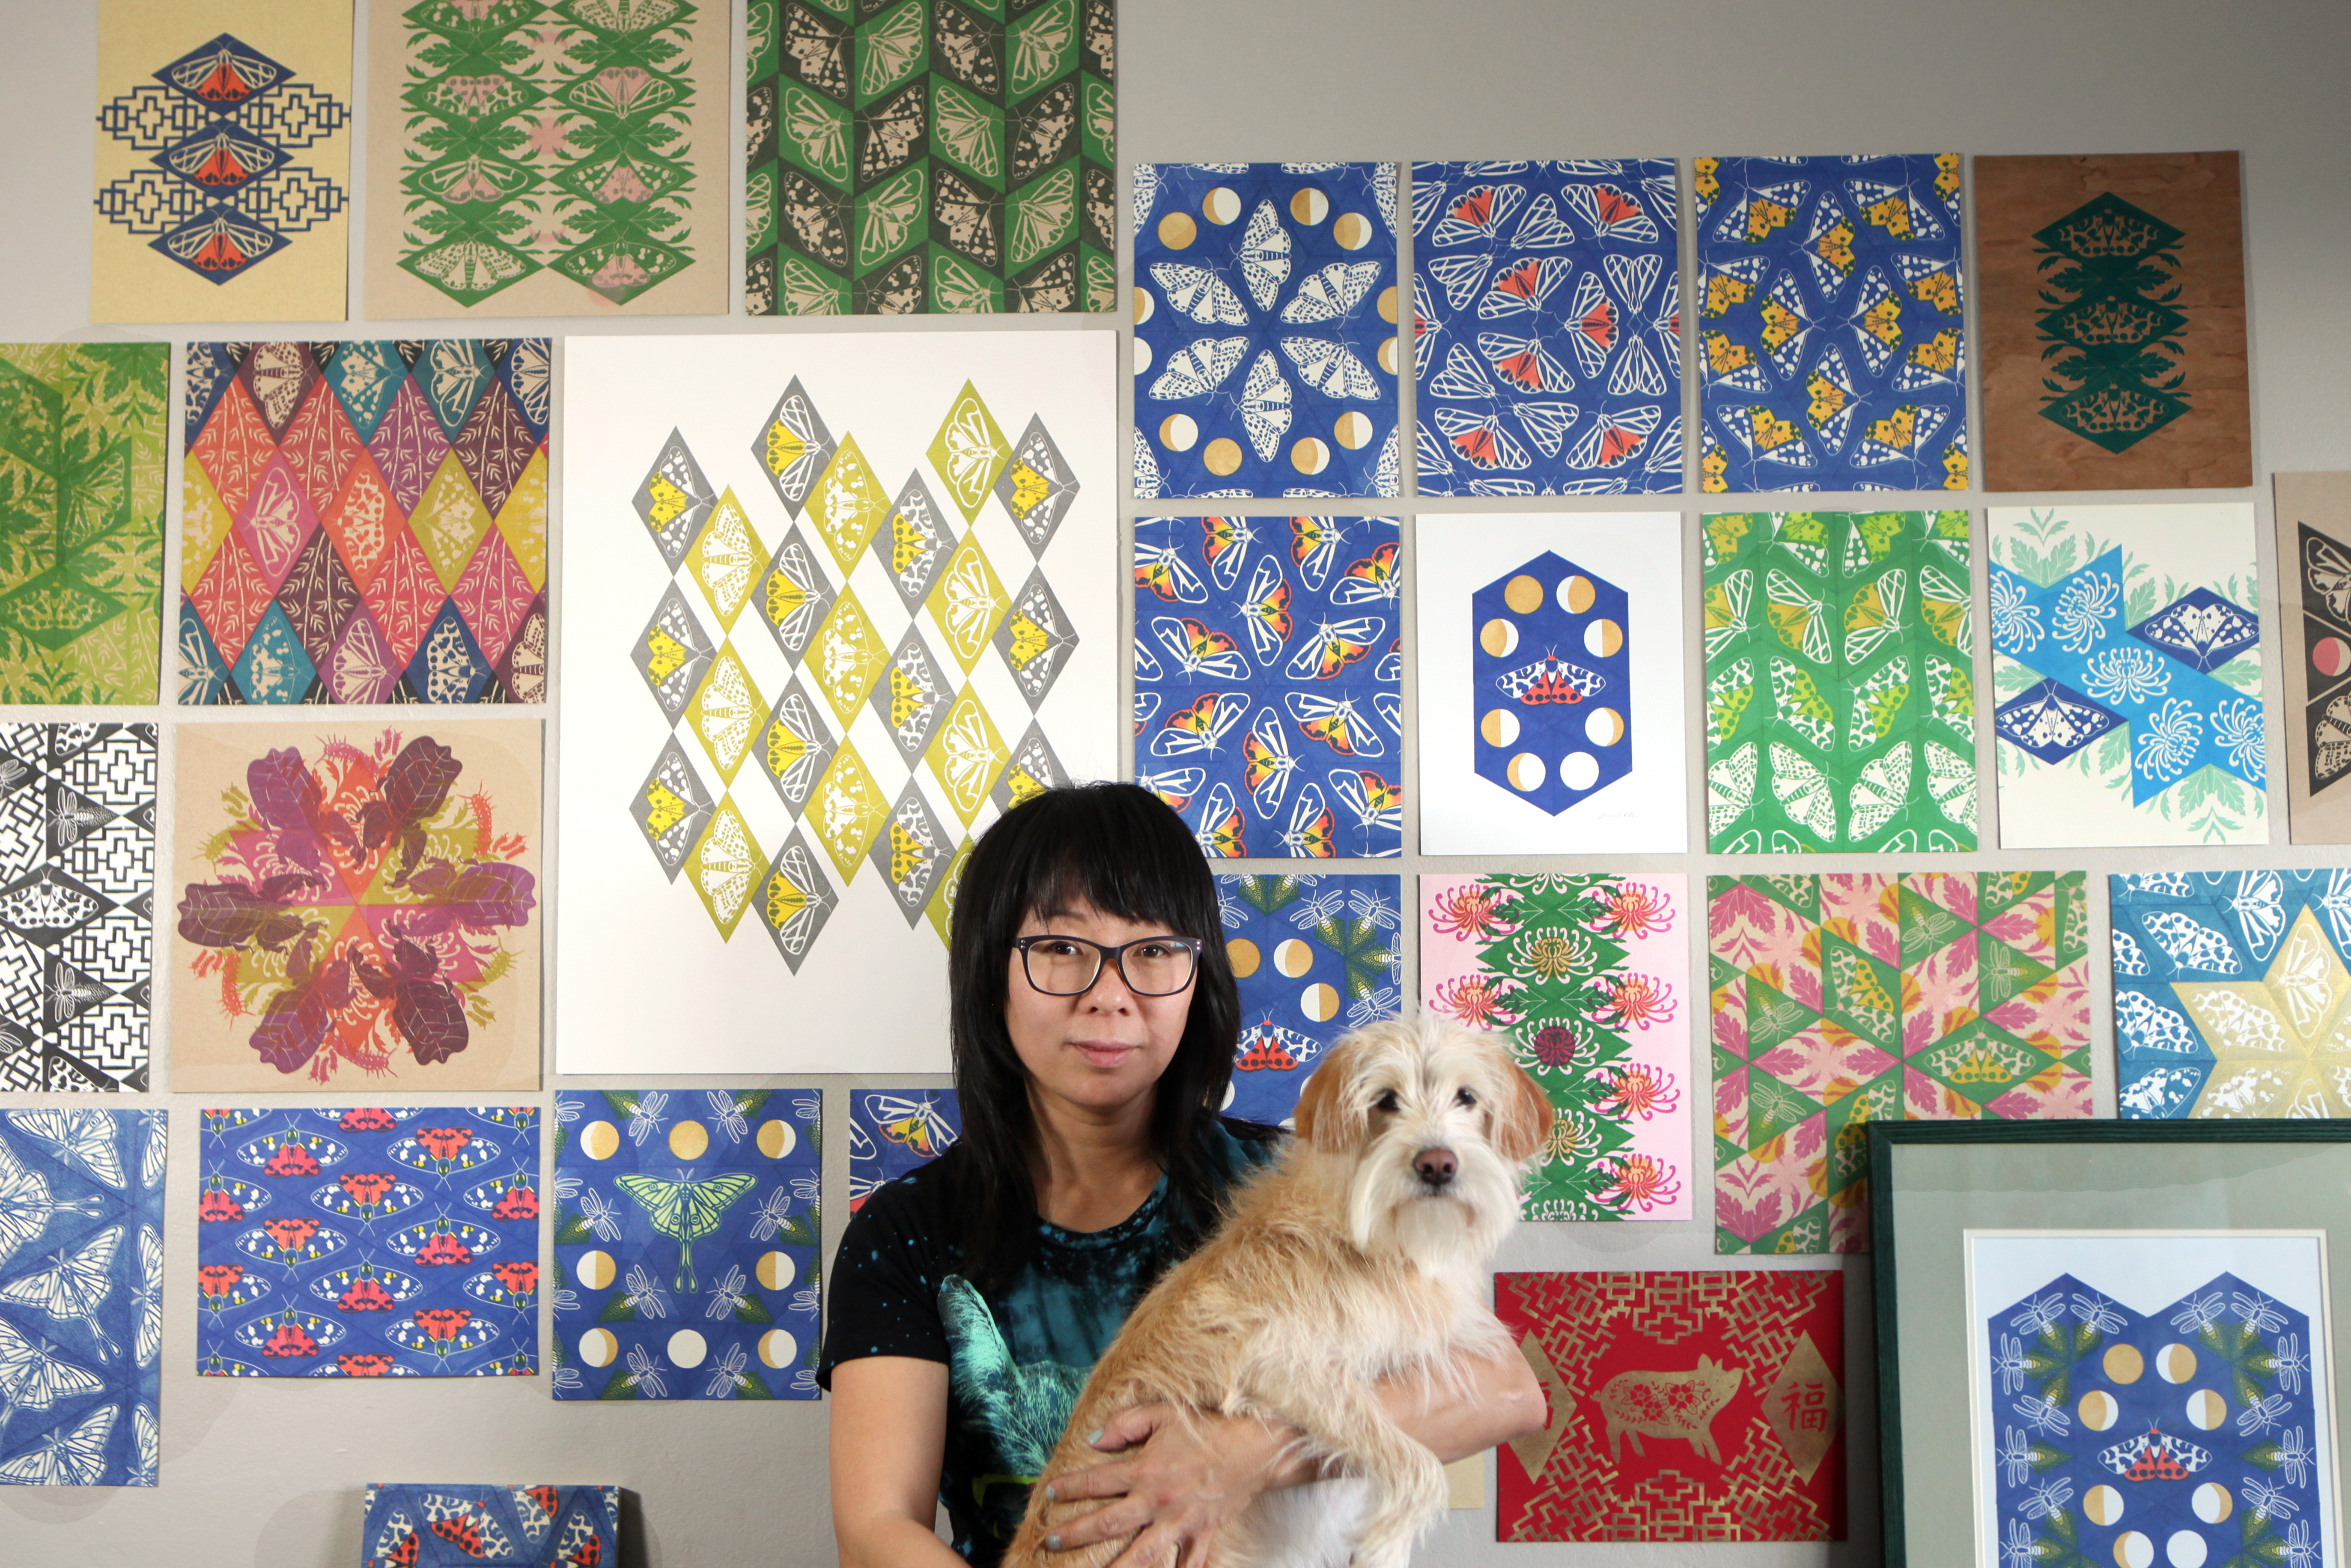 Jennifer Zee carrying her dog in front of art